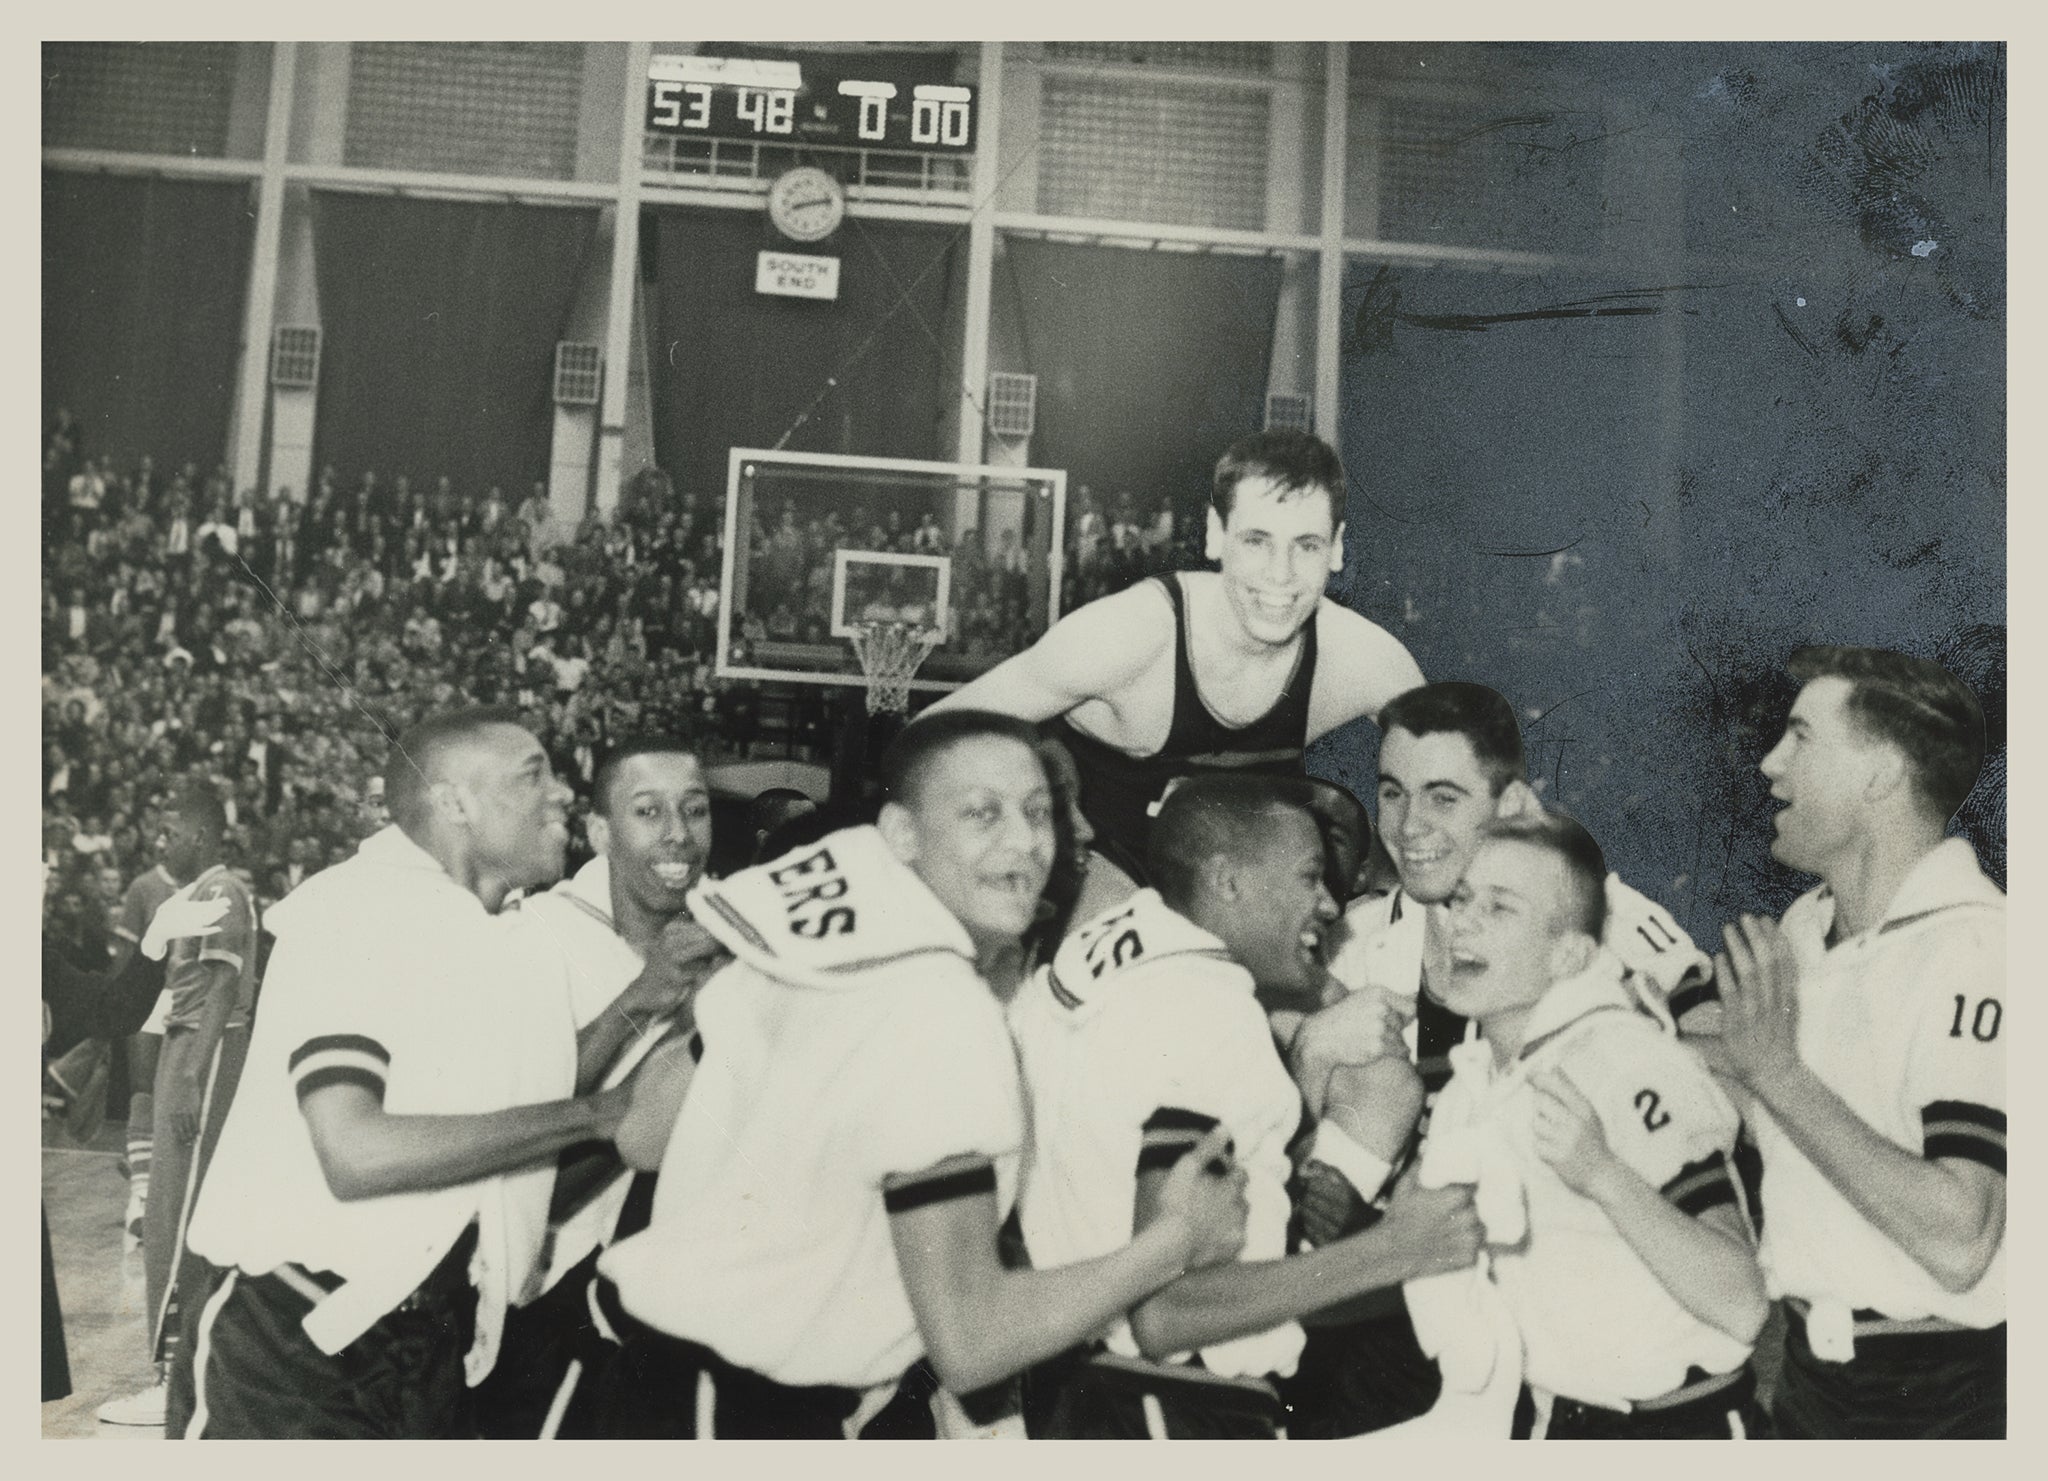 image of Al Andrews and his basketball team celebrating victory